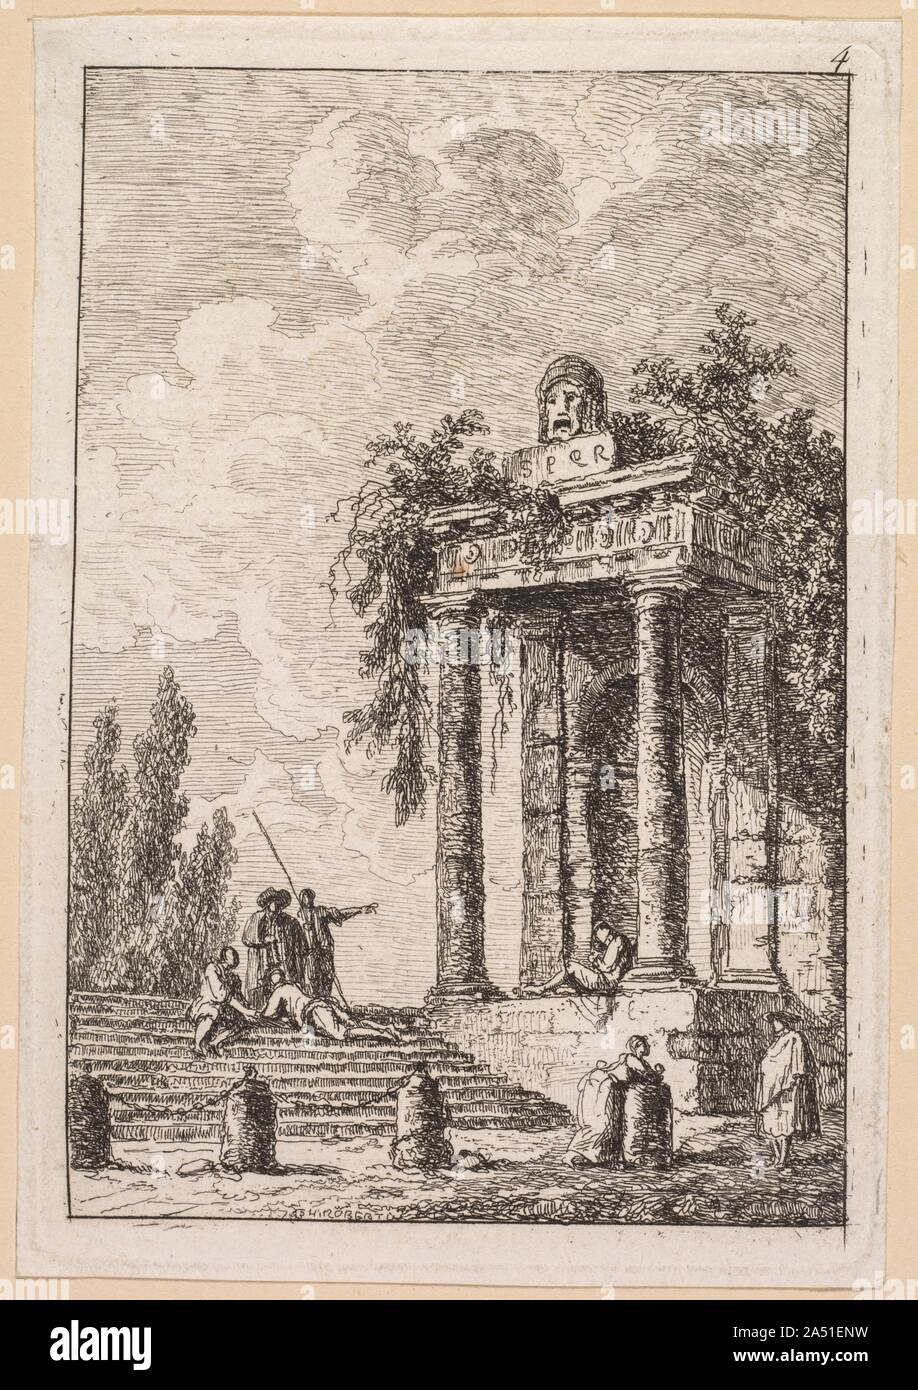 Les Soir&#xe9;es de Rome: LEscalier aux quatre bornes, 1763. Derived from his own pen-and-ink drawings, this suite of etchings features fictional characters situated near recognizable buildings and statues in Rome. On the title page, Robert dedicated the suite to Marguerite Le Compte, who visited Rome in 1764 in the company of the wealthy author and art enthusiast Claude Henri Watelet. Both Le Compte and Watelet were amateur etchers, and they socialized with a group that included artists and printmakers centered at the academies in Italy. Robert&#x2019;s dedication was likely motivated by the Stock Photo